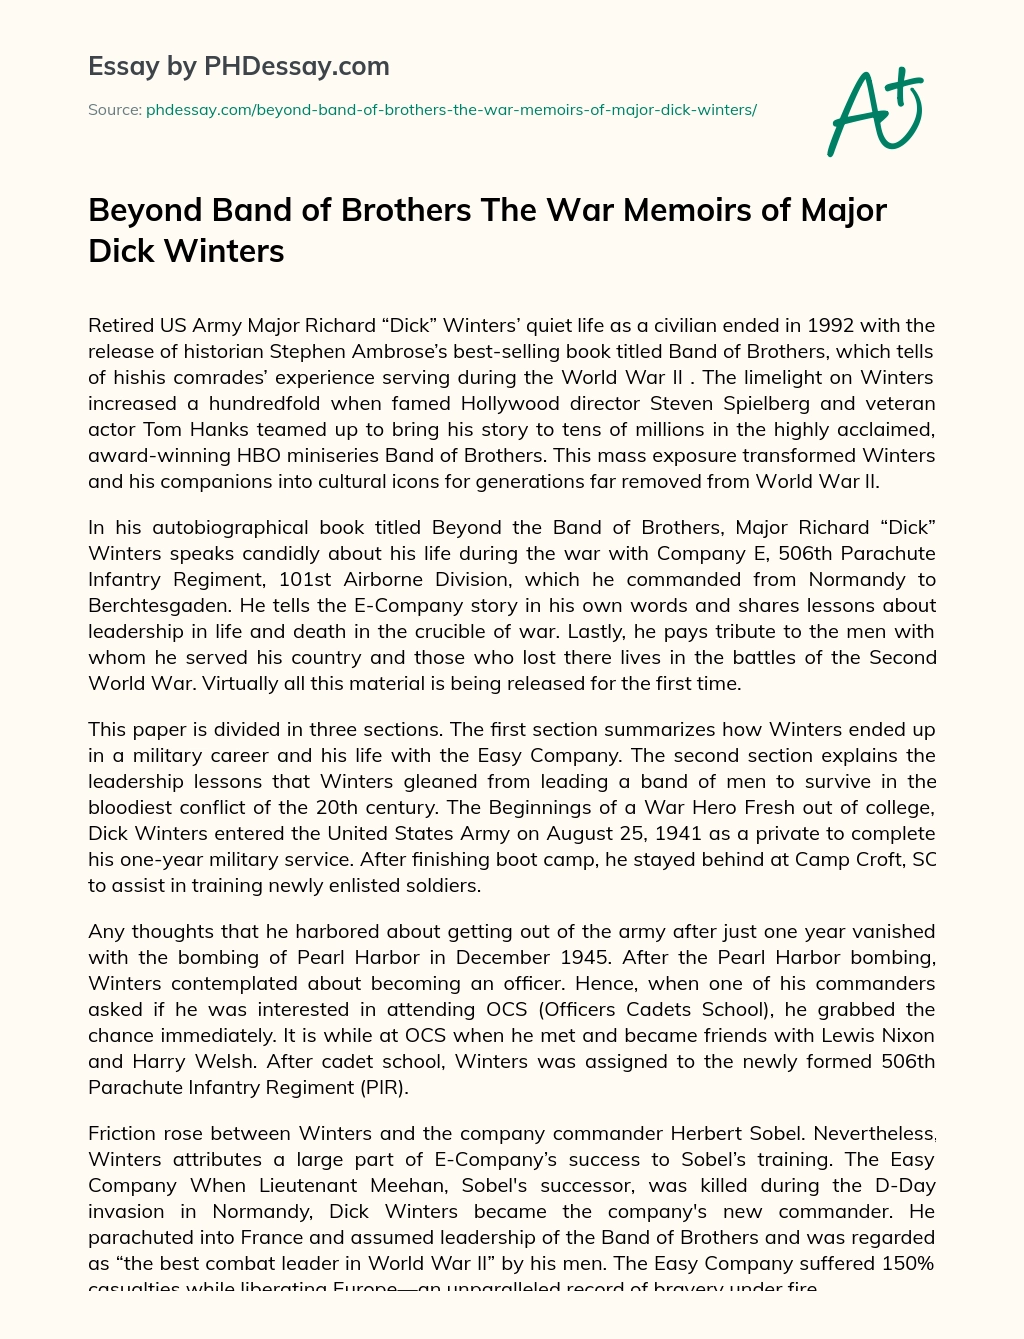 Beyond Band of Brothers The War Memoirs of Major Dick Winters essay